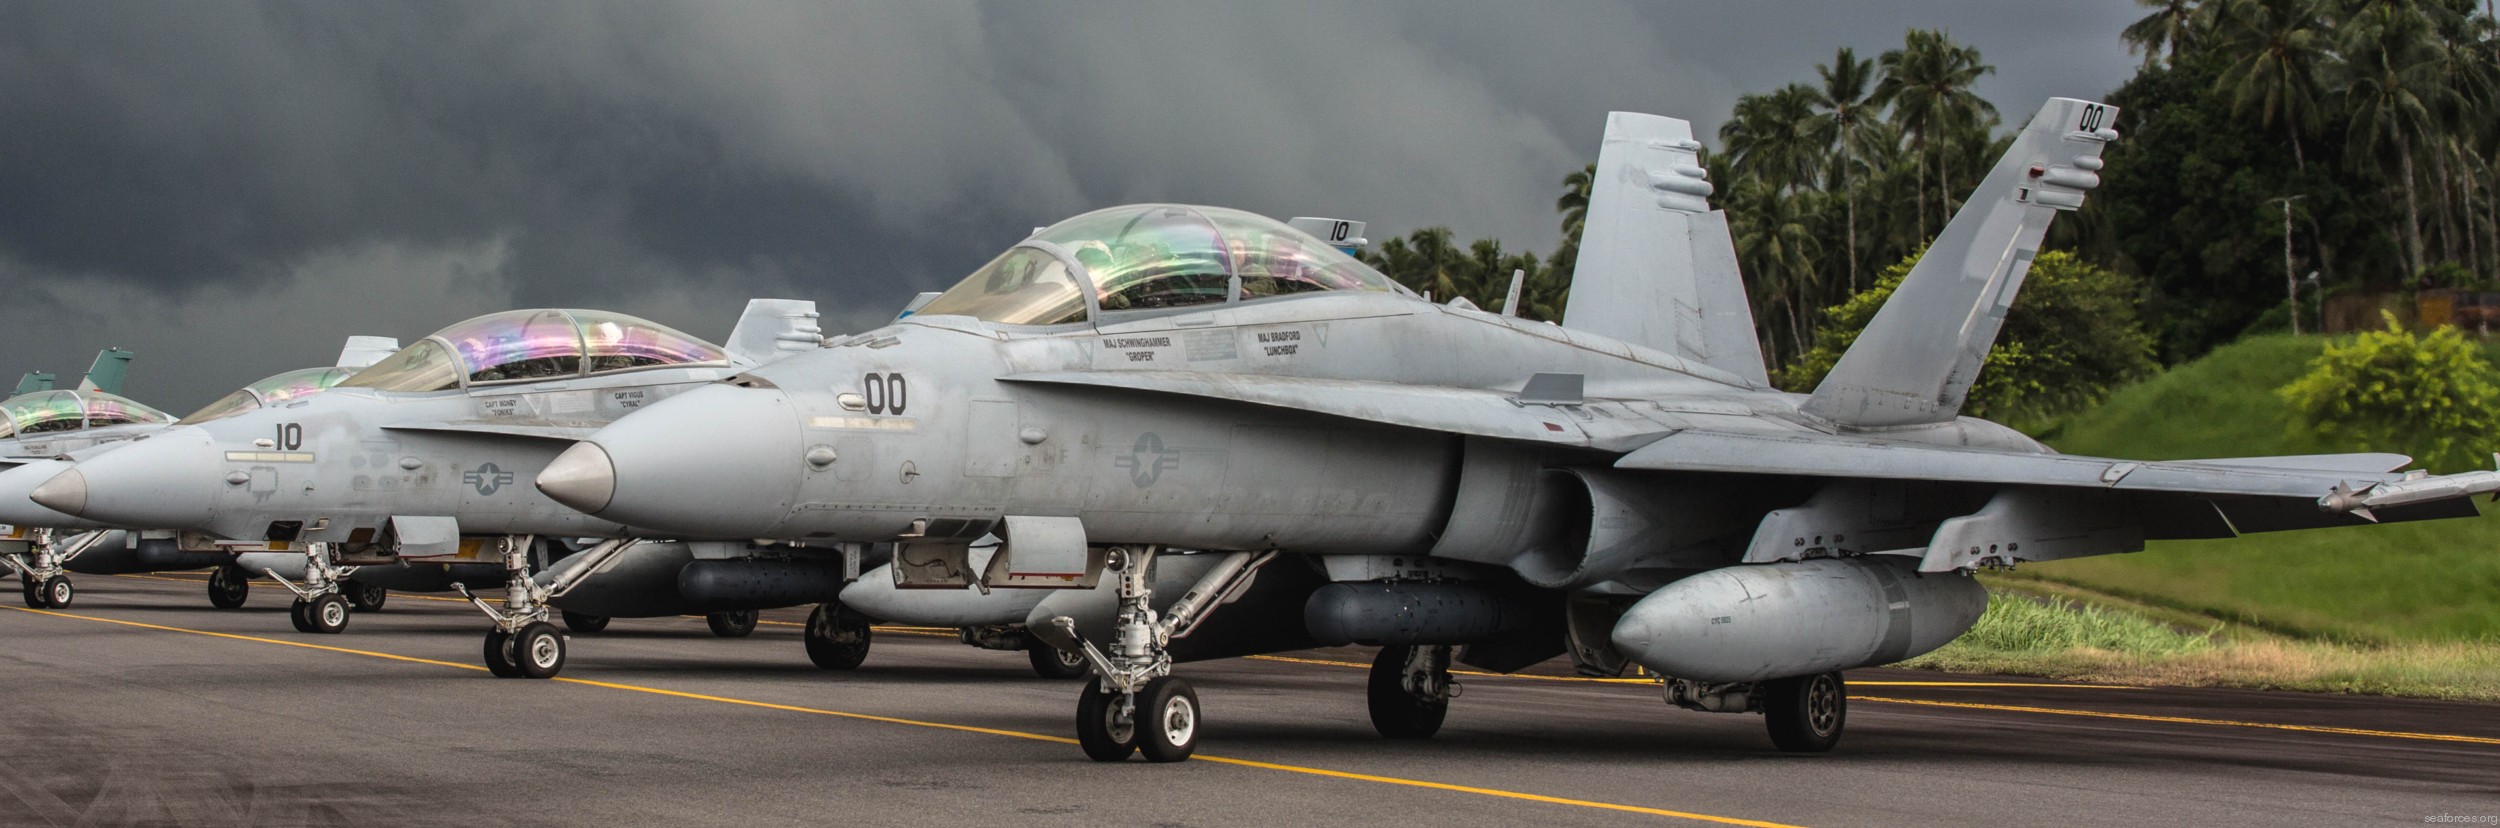 vmfa(aw)-225 vikings marine fighter attack squadron f/a-18d hornet 23 exercise cope west